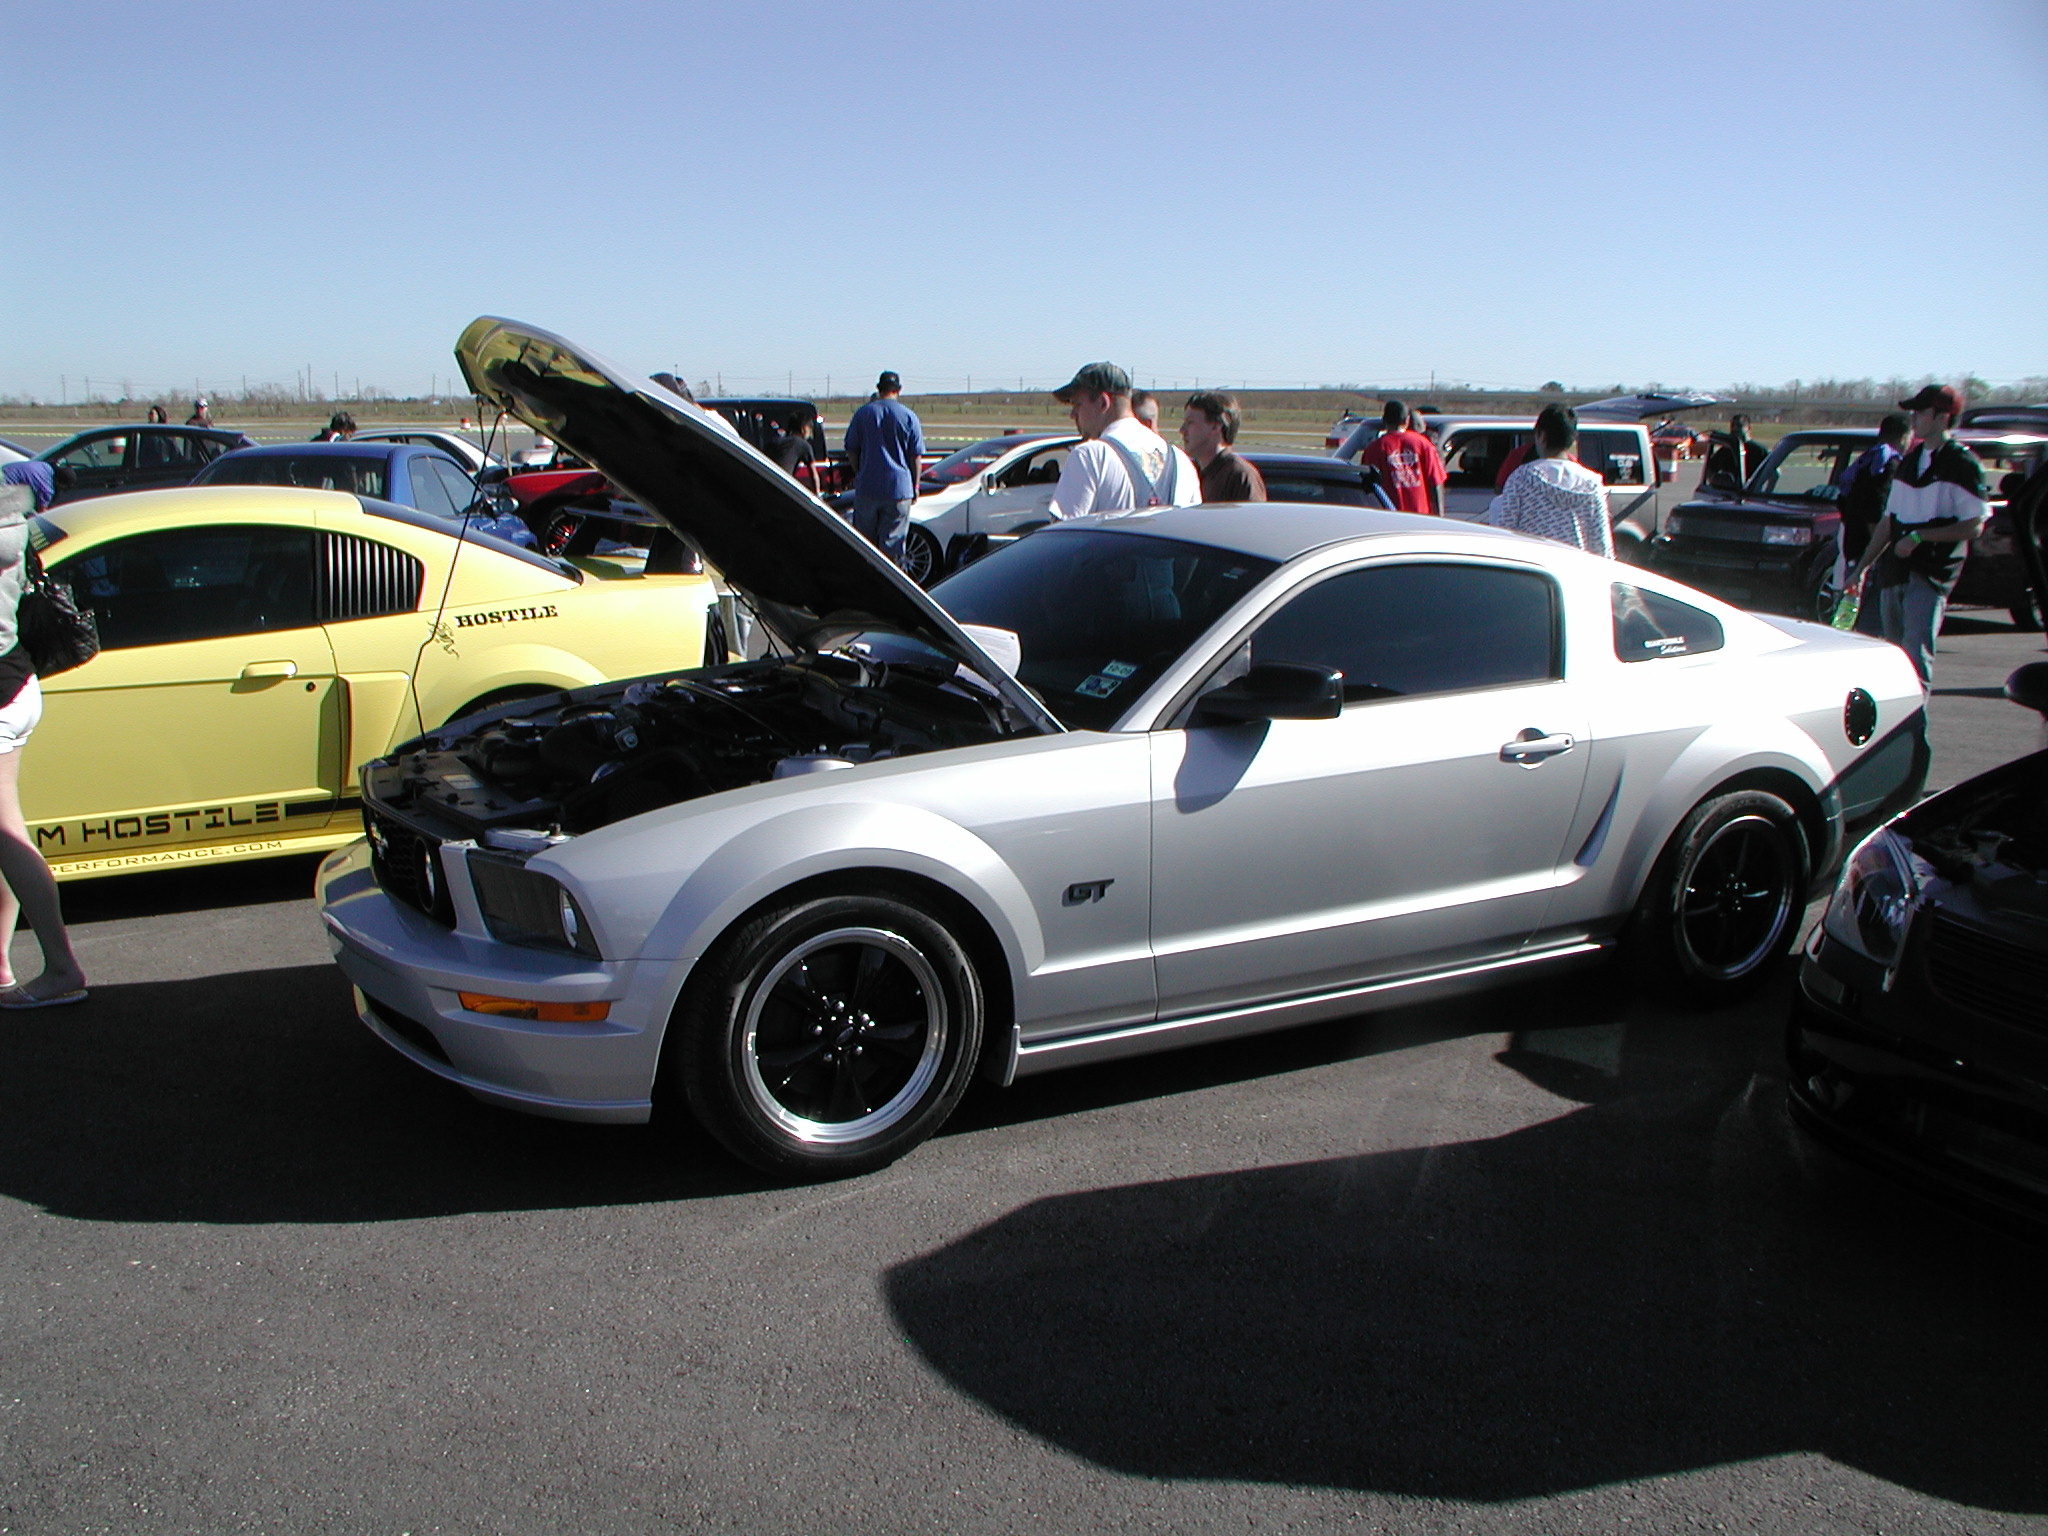 2007 Ford mustang gt quarter mile #4